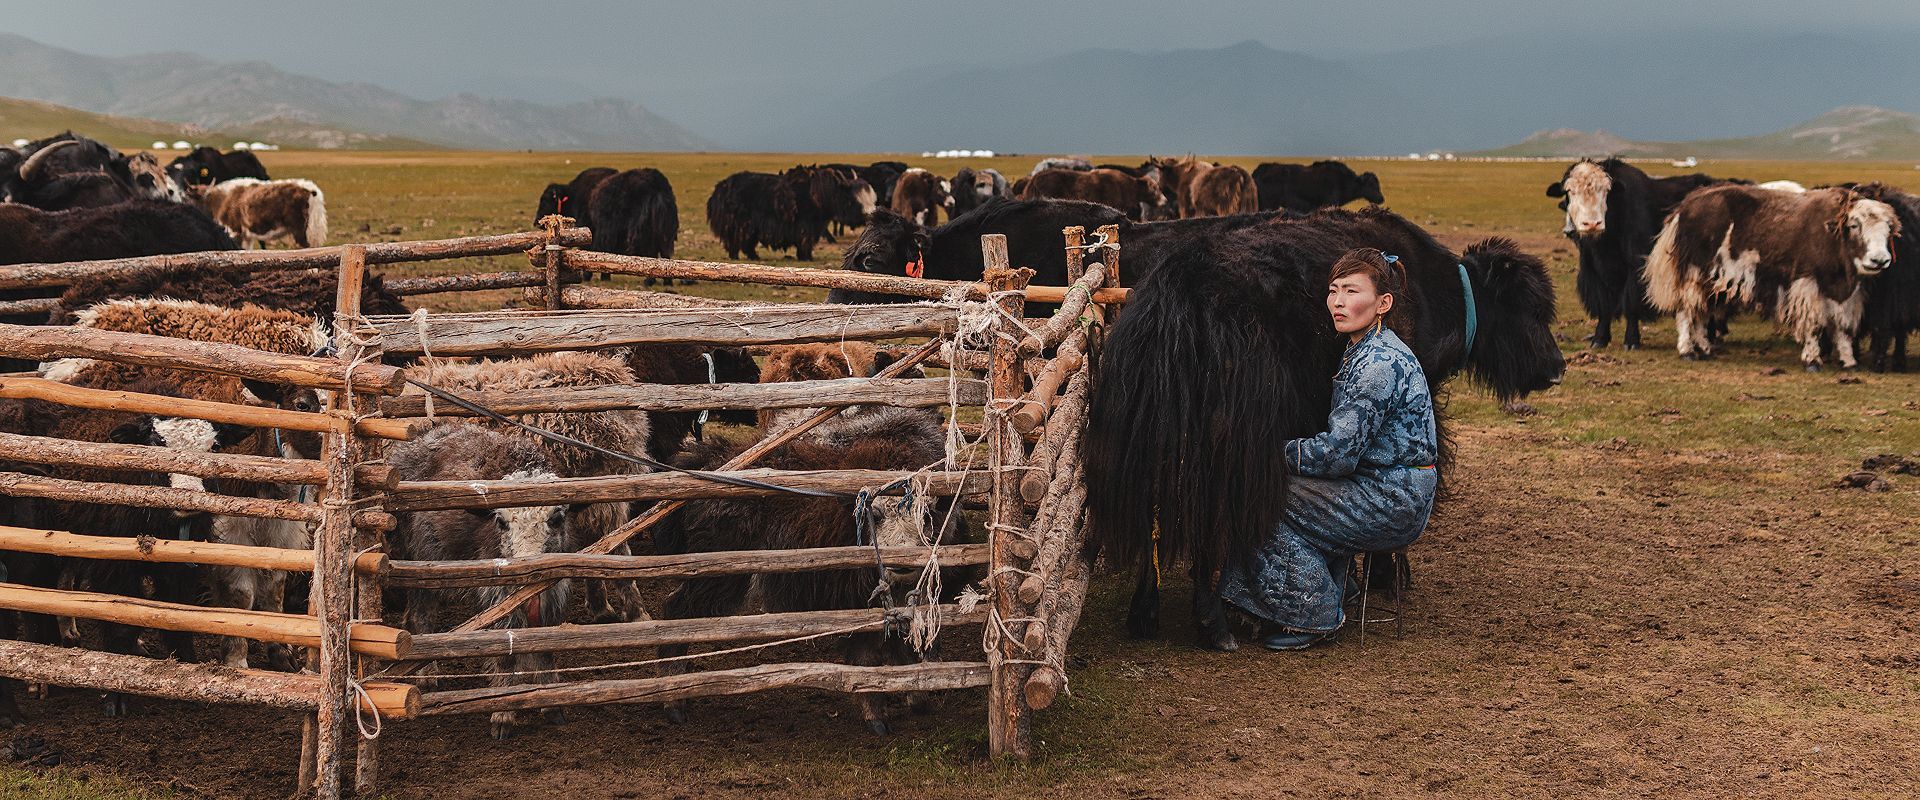 JOIN THE QUIET LIFE OF THE YAK HERDERS IN THE ARKHANGAI PROVINCE, AT THE GATE OF A MAGICAL ADVENTURE TO THE WEST